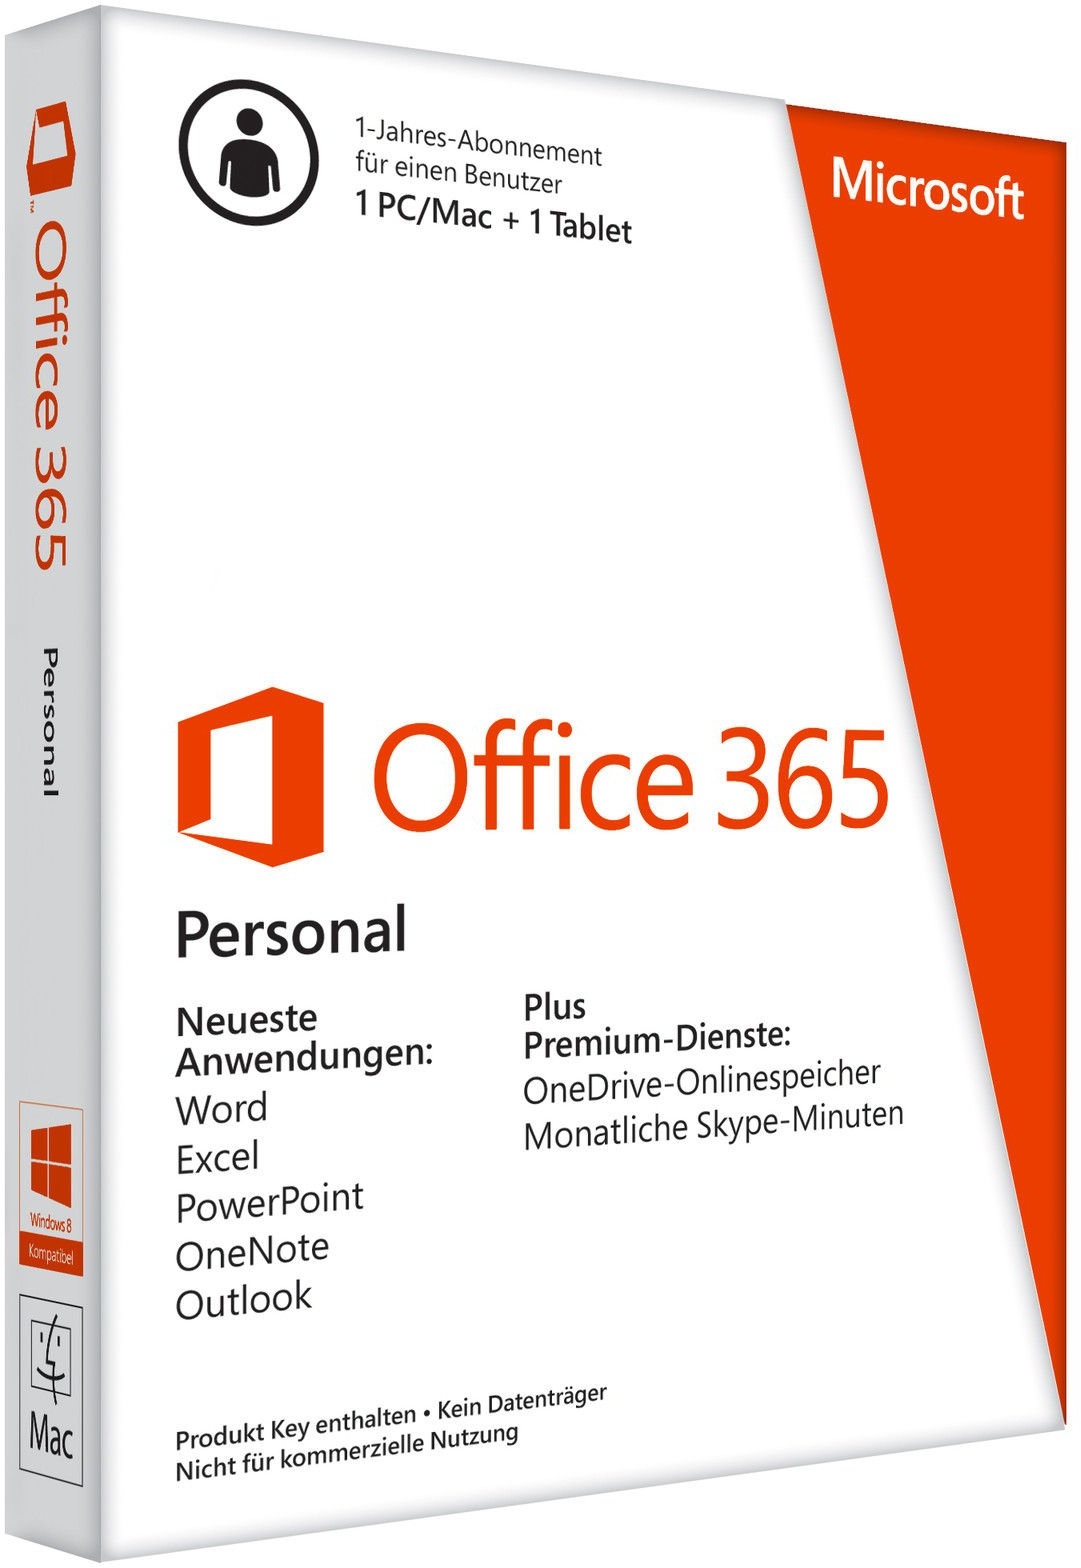 Microsoft Office 365 Personal ab 39,90 € 